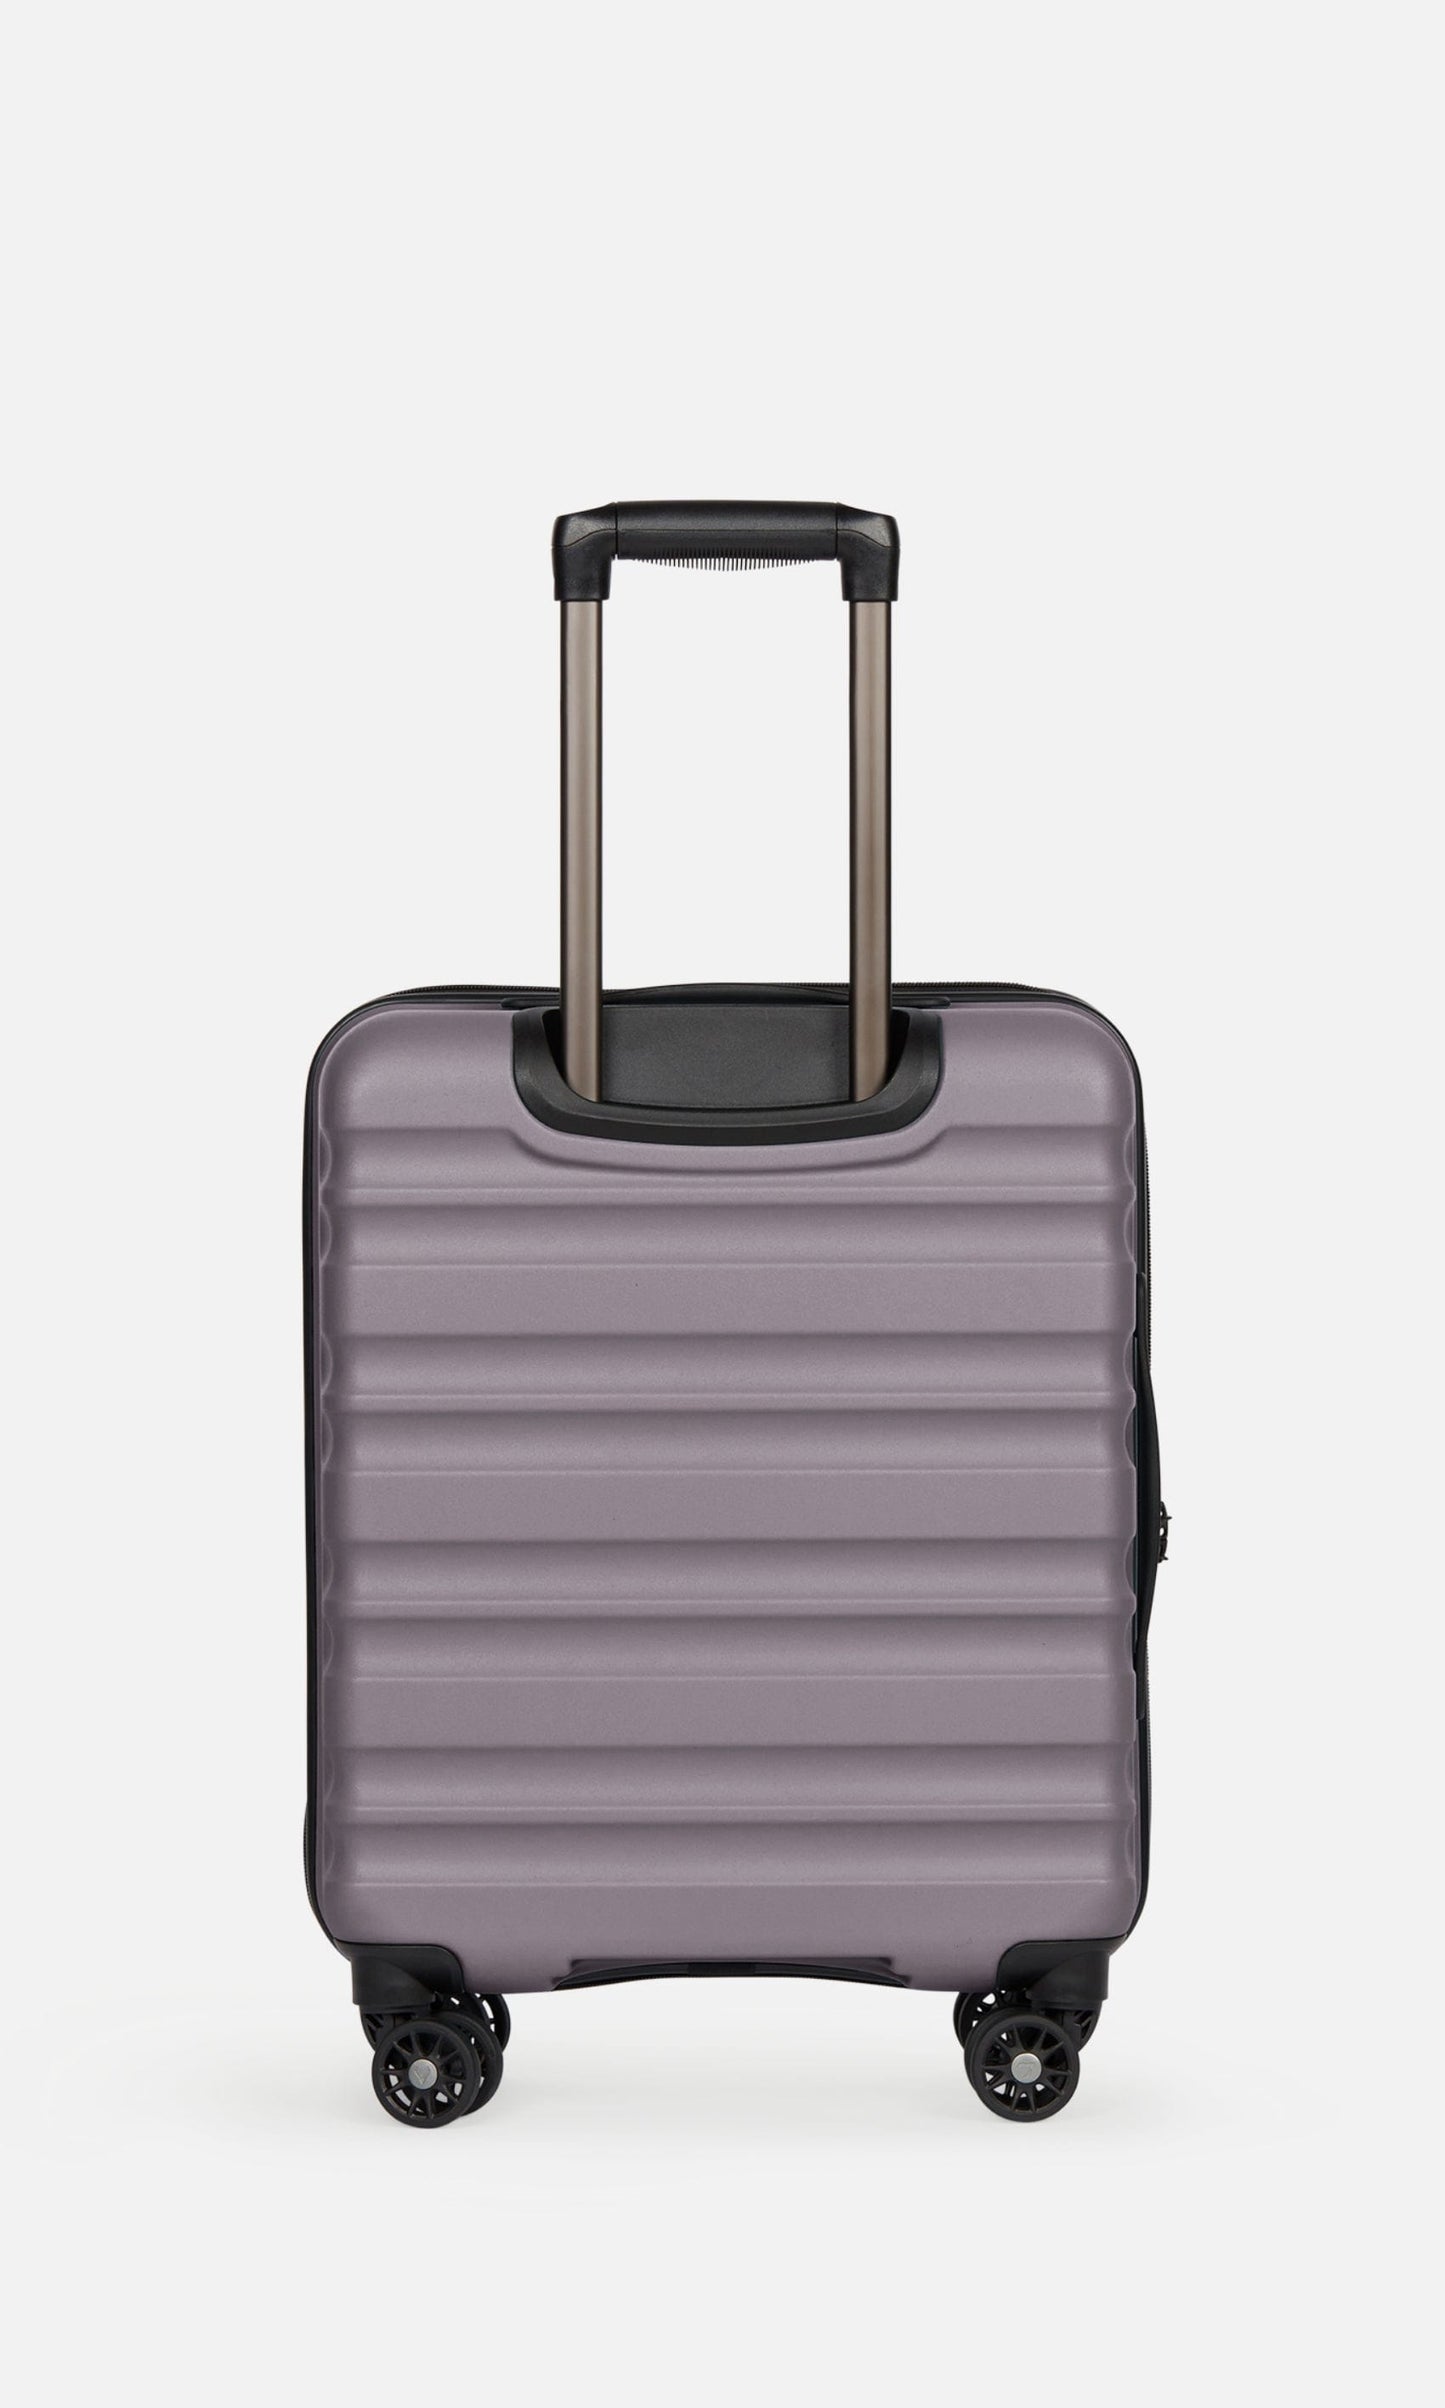 Antler Luggage -  Clifton cabin in meadow purple - Hard Suitcases Clifton Cabin Suitcase 55x40x20cm Purple | Hard Suitcase | Antler UK